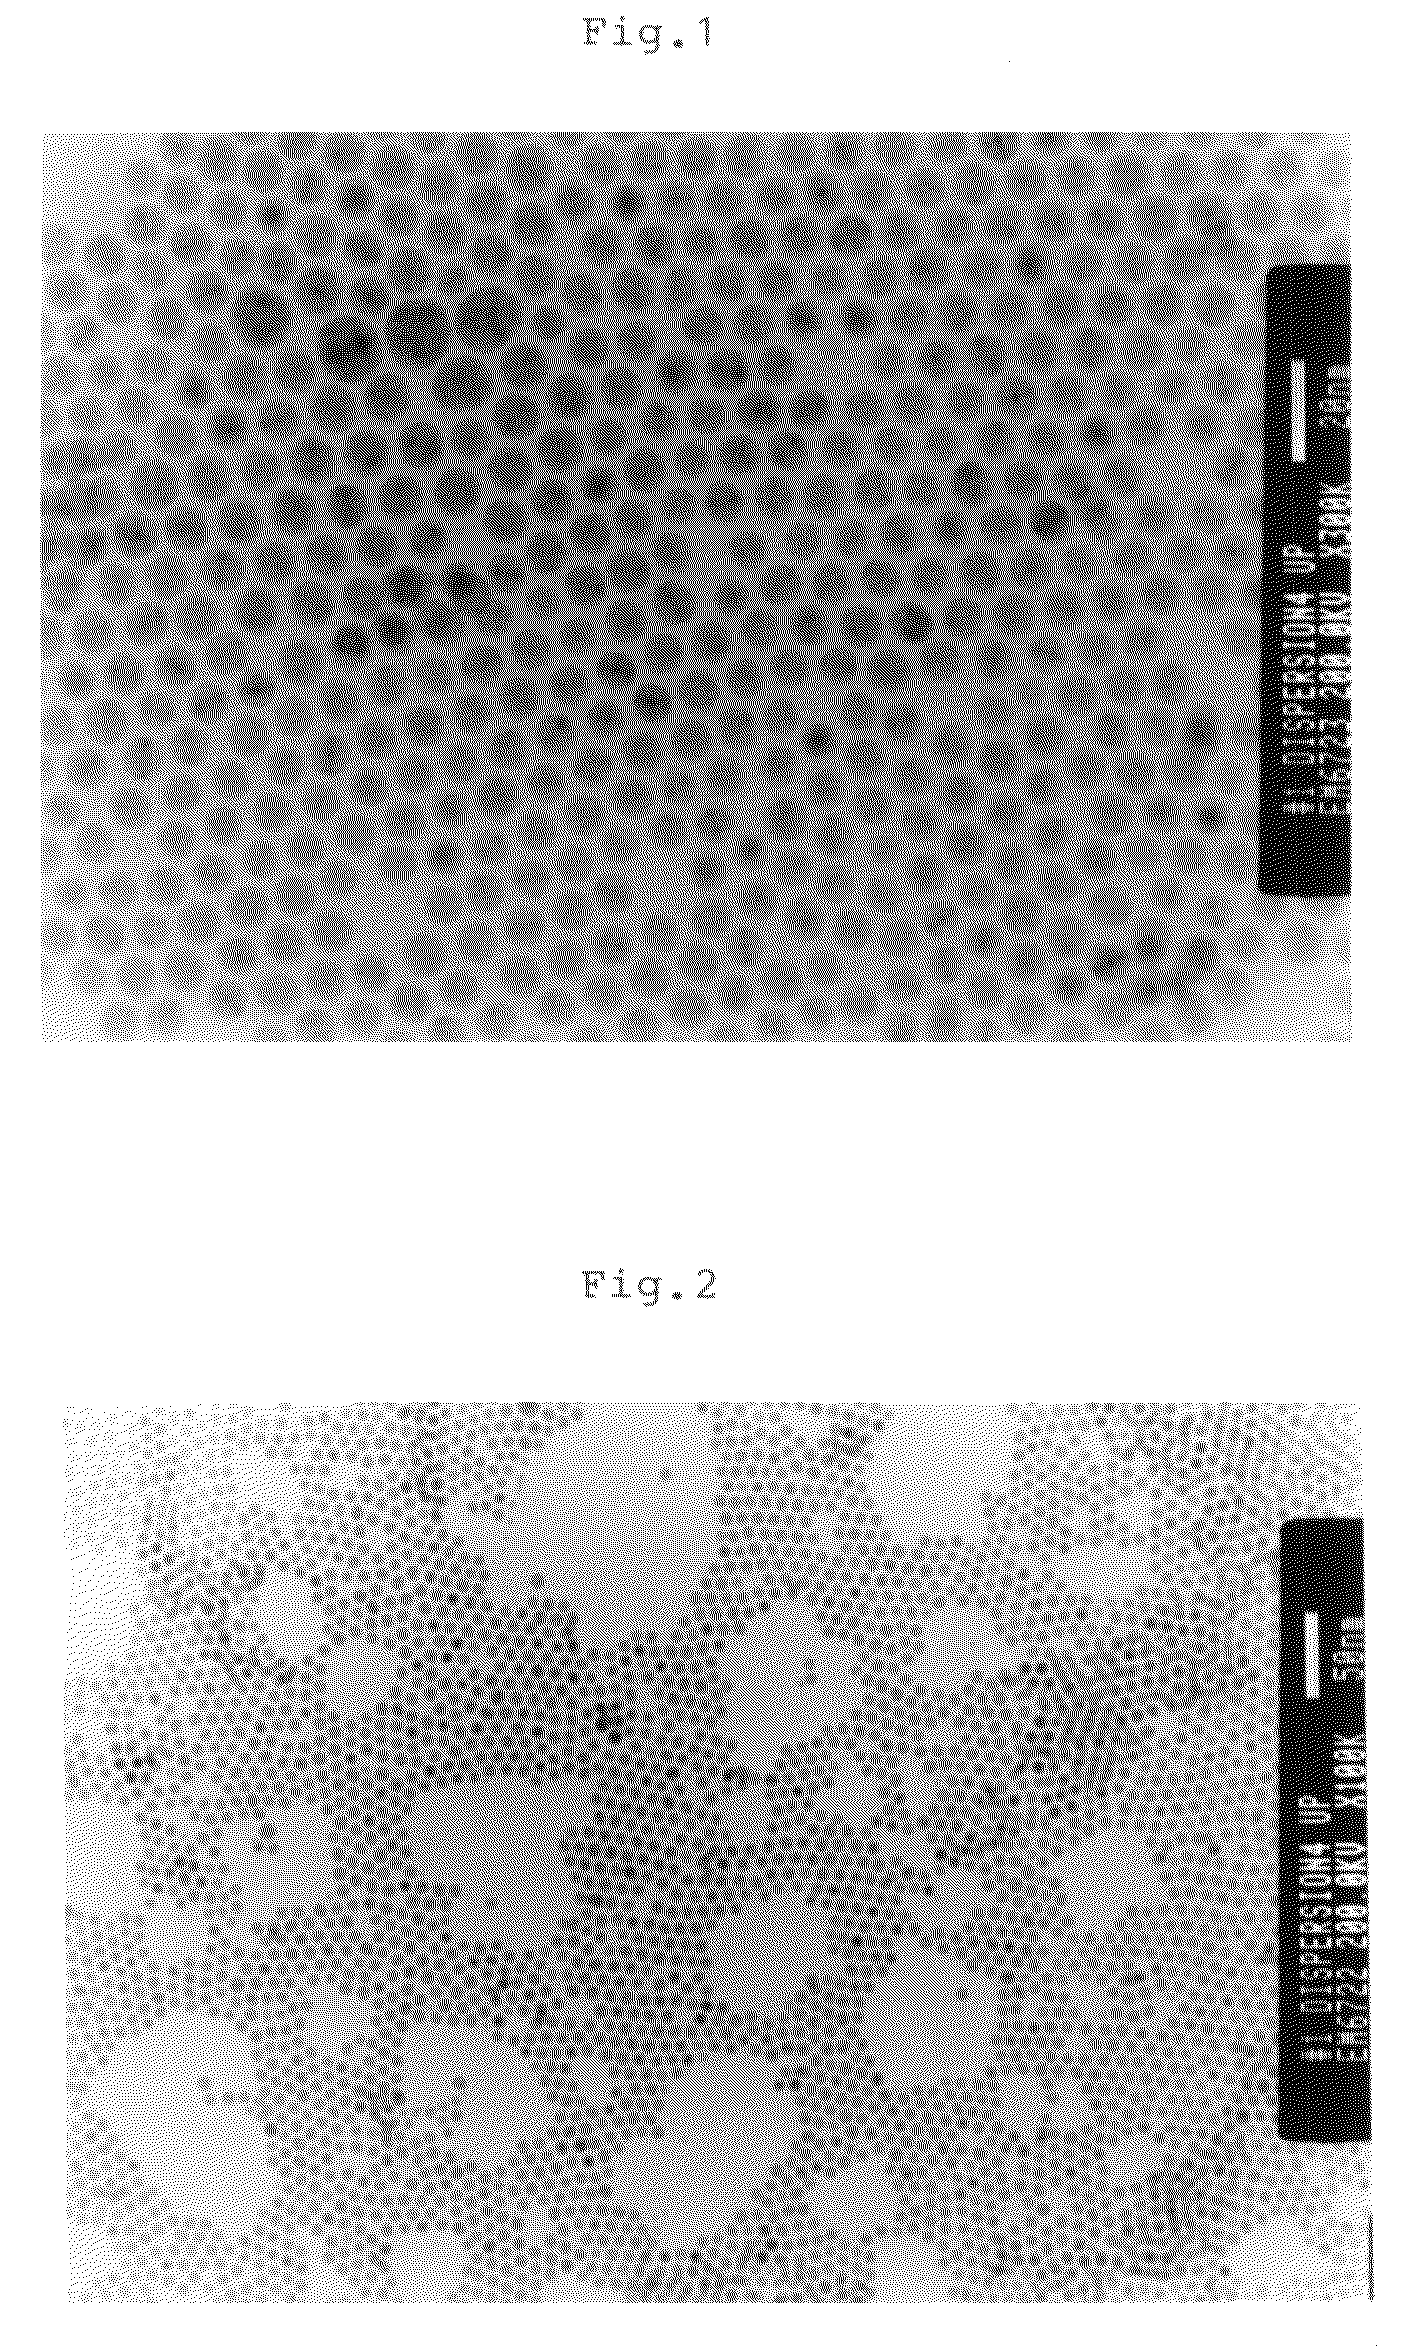 Particulate powder of silver and method of manufacturing same